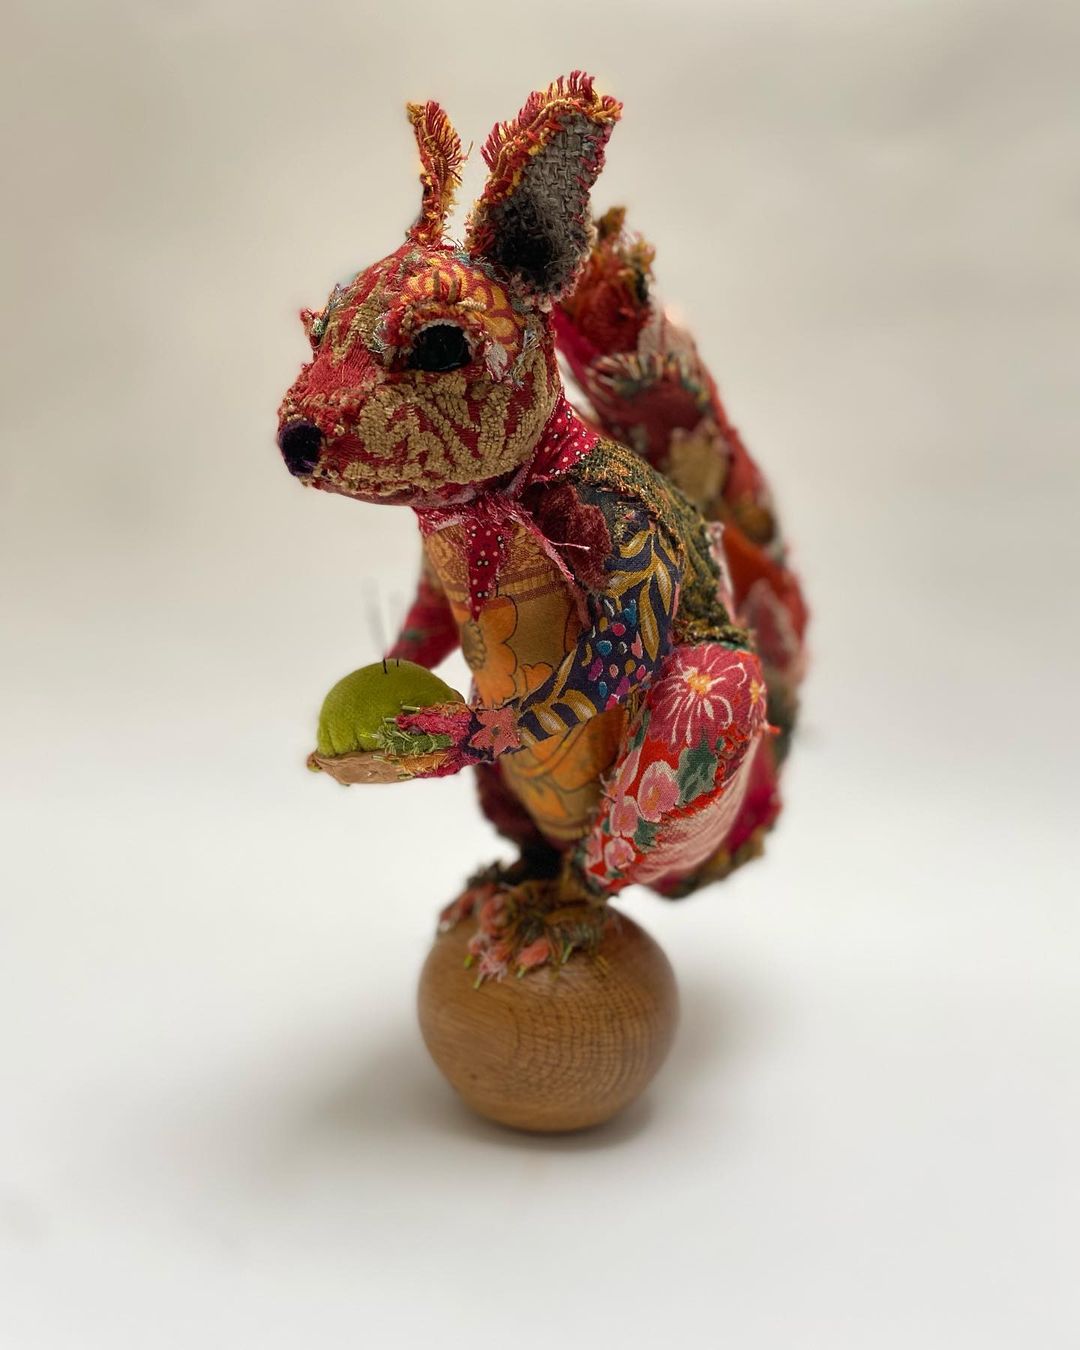 Pretty Scruffy Enchanting Animal Textile Sculptures By Bryony Rose Jennings 17